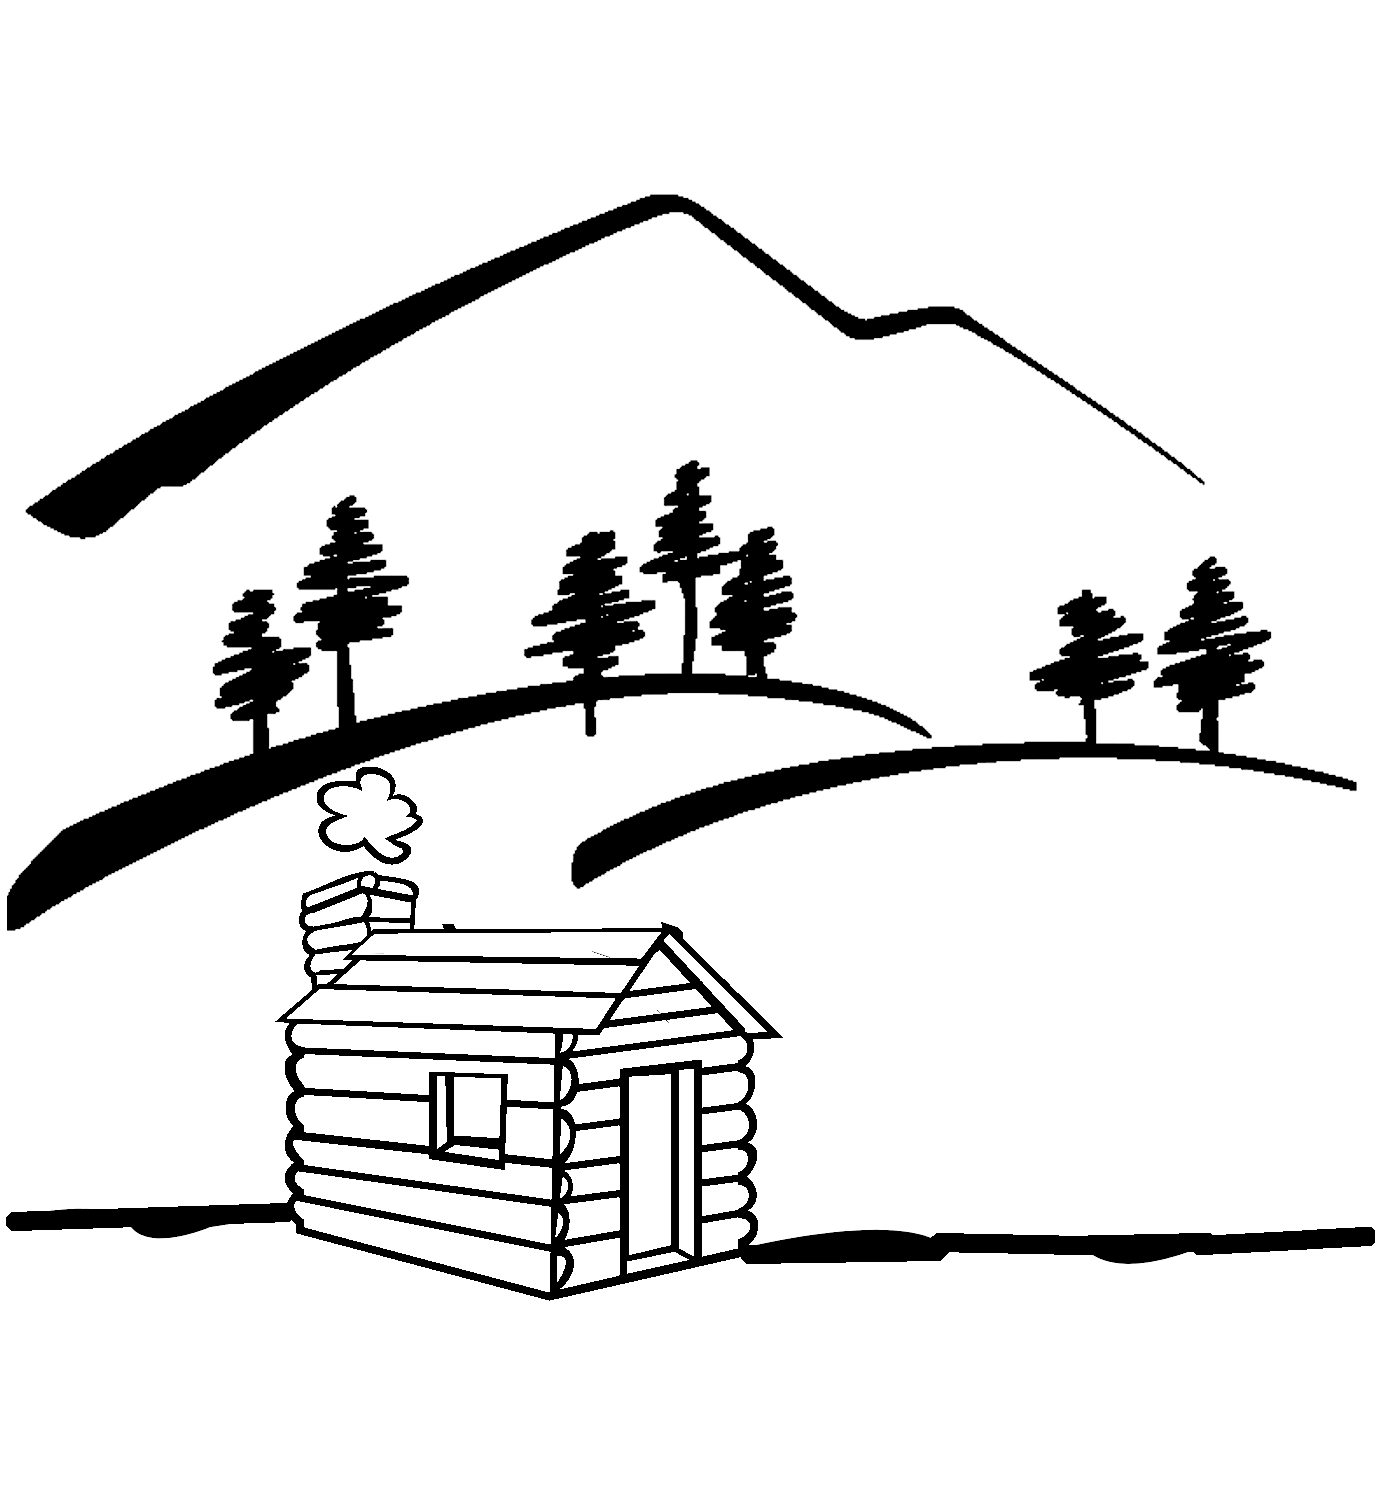 Cabin Clipart Black And White | Clipart Panda - Free Clipart Images